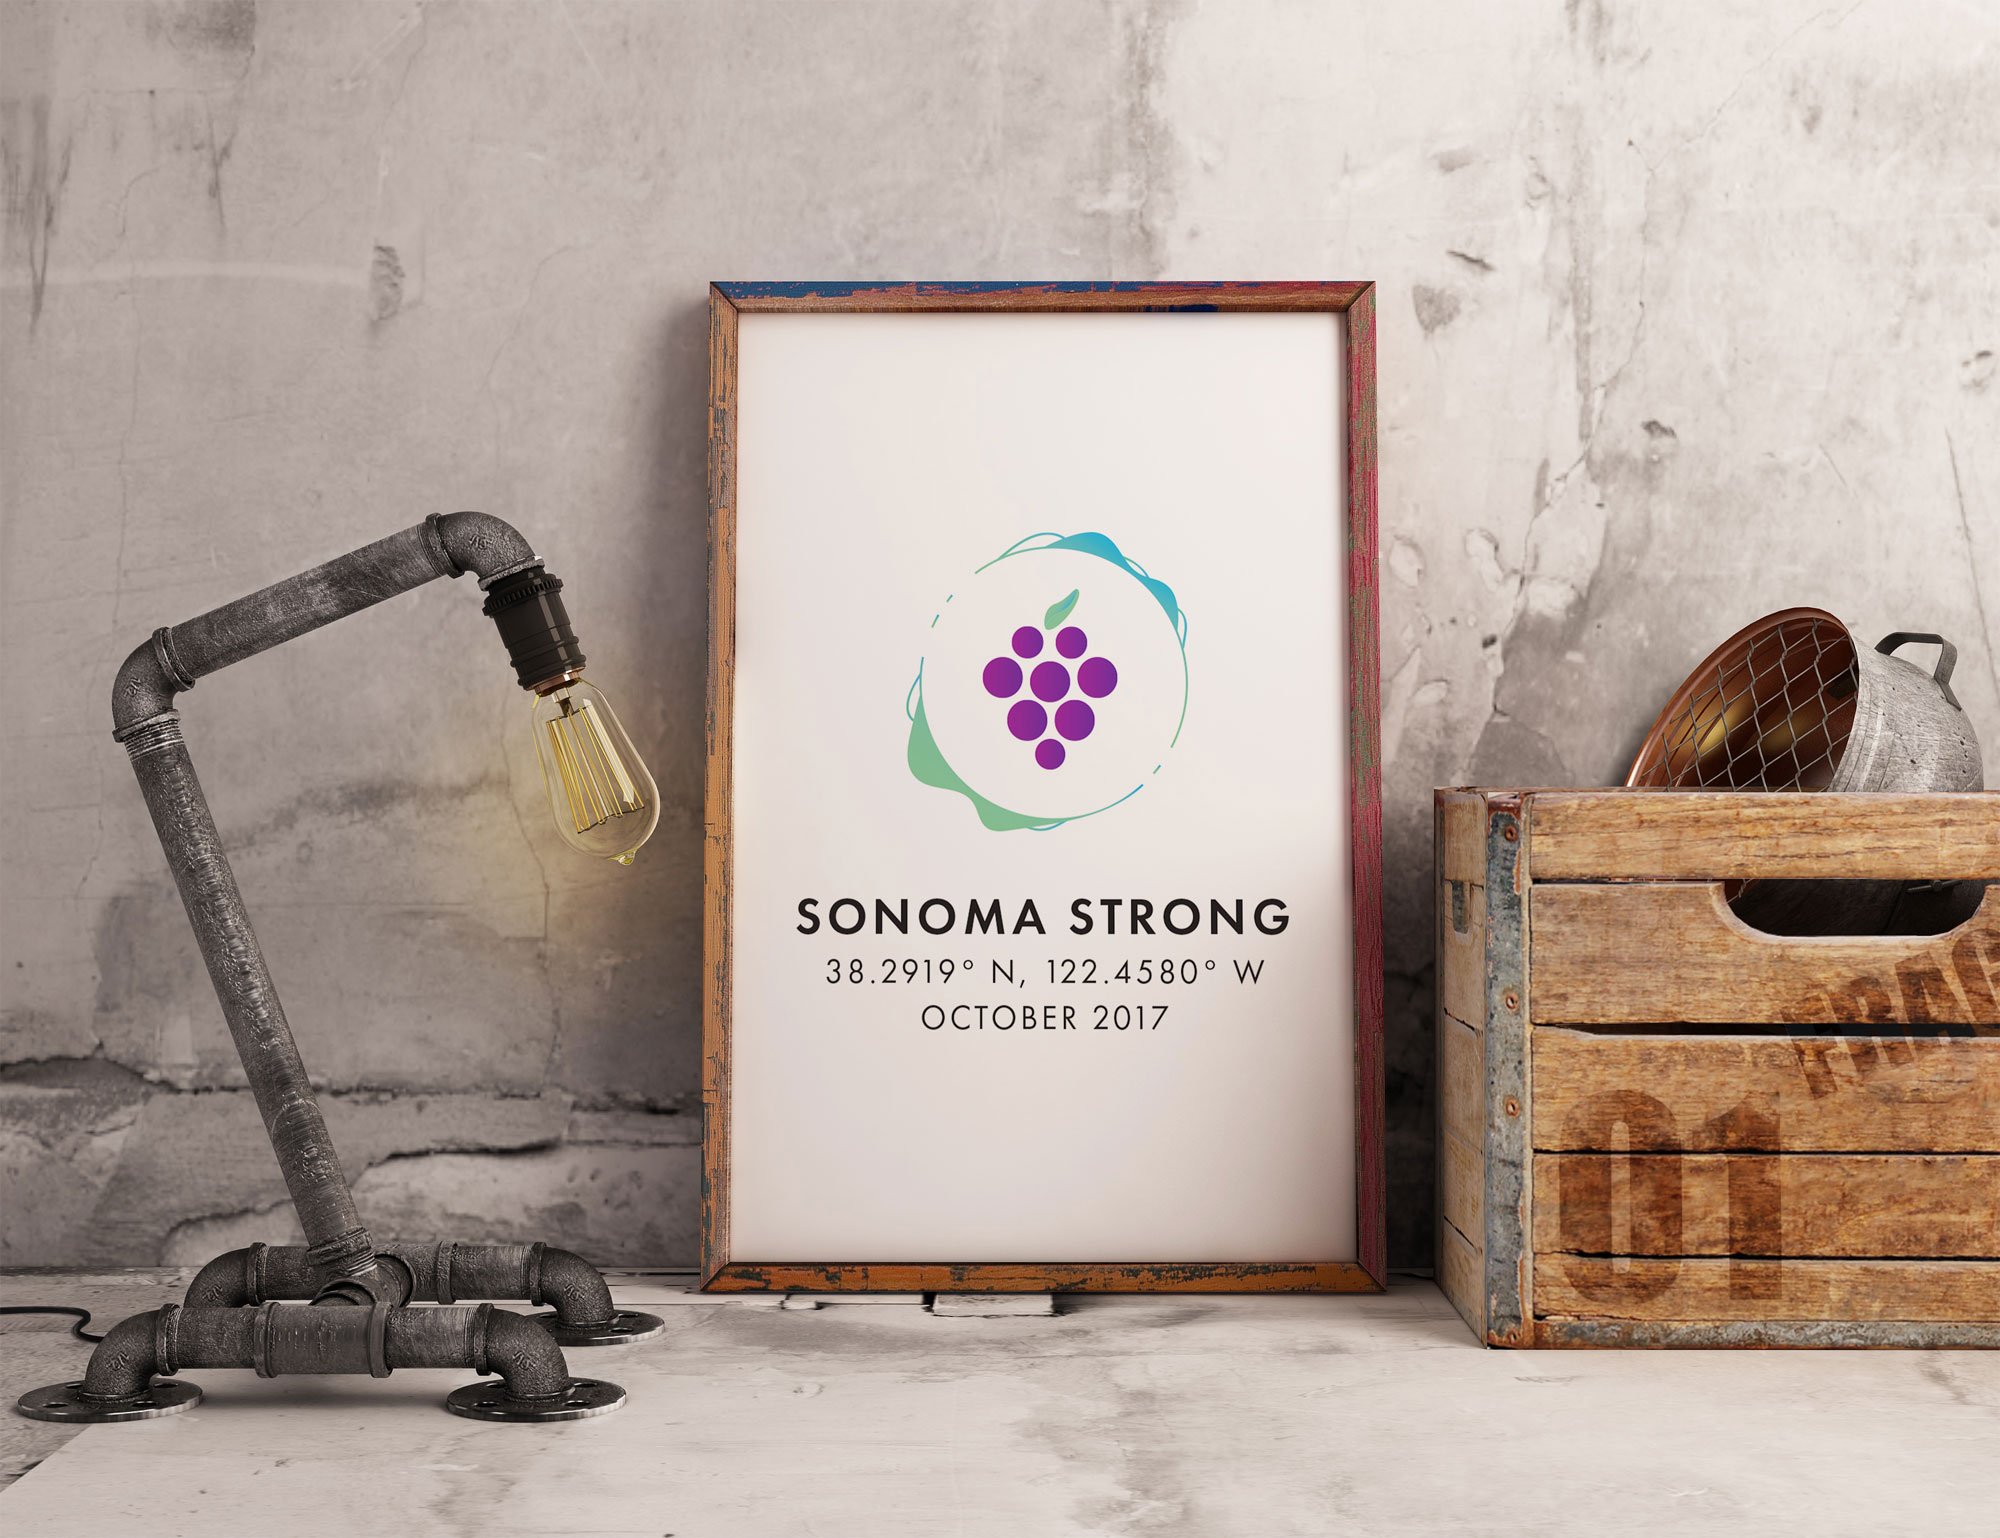 Sonoma-strong-poster-final-hero-inc